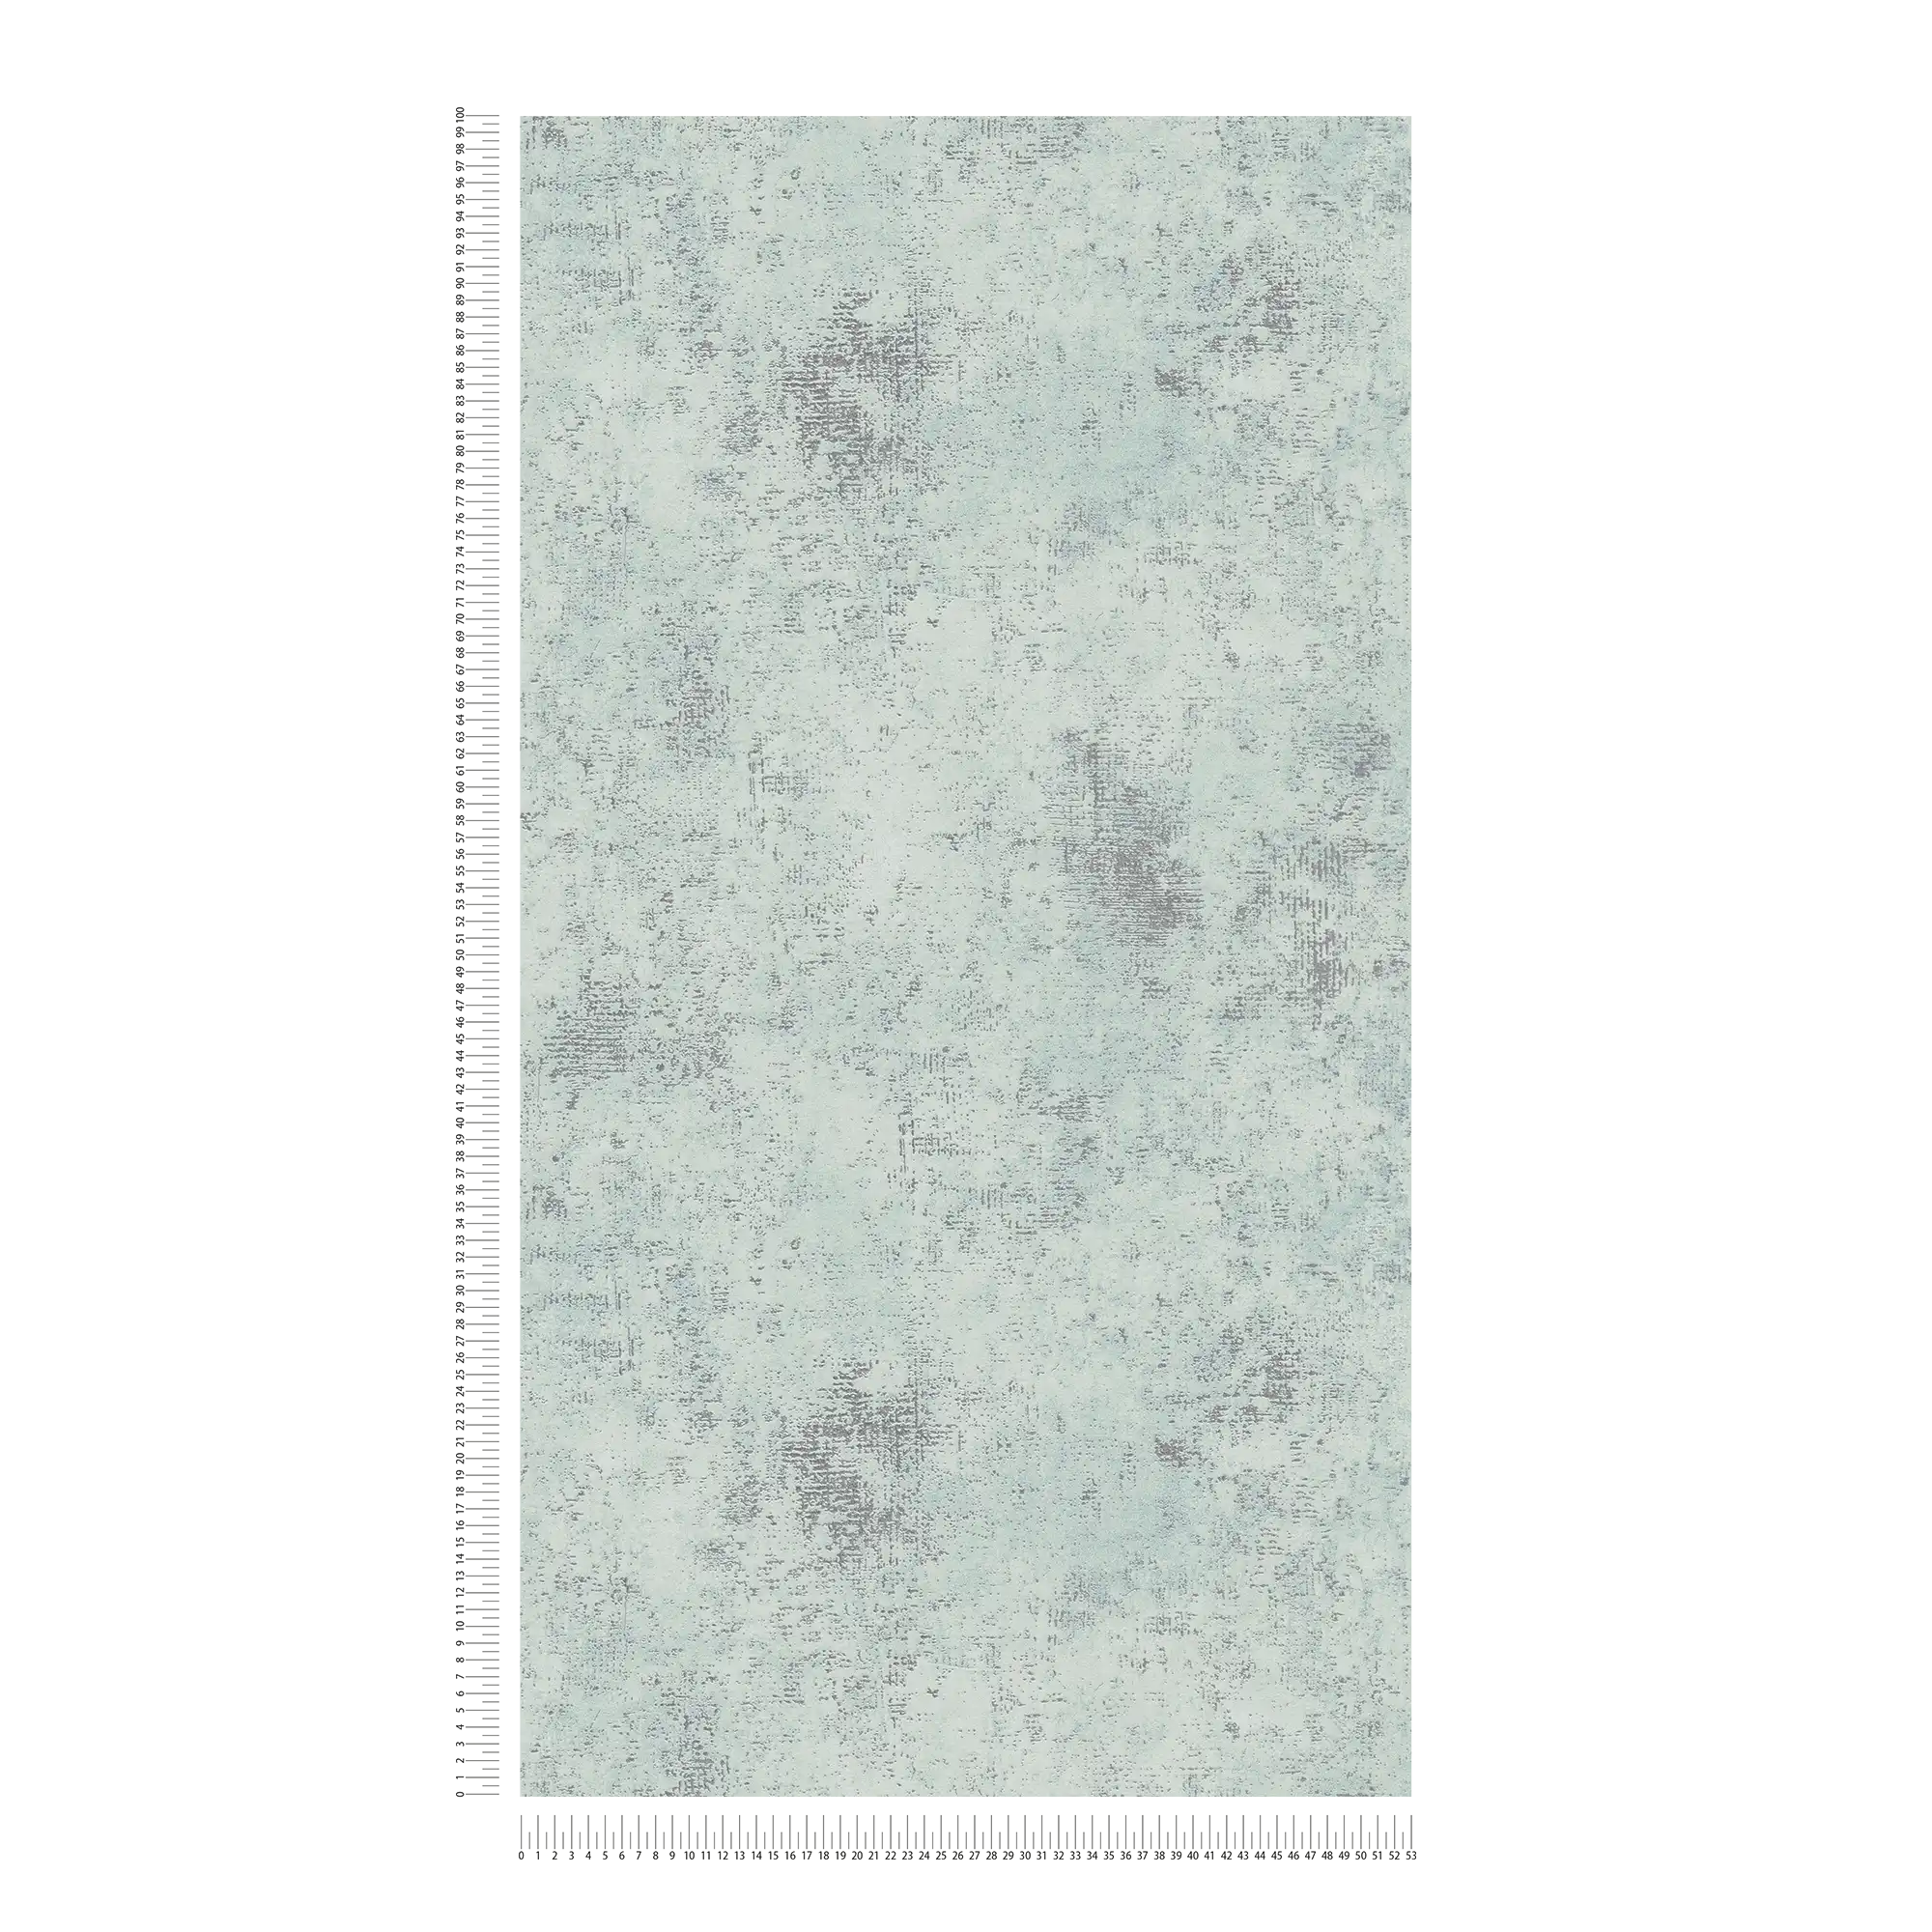             Rustic plaster look wallpaper with structure - blue, green, grey
        